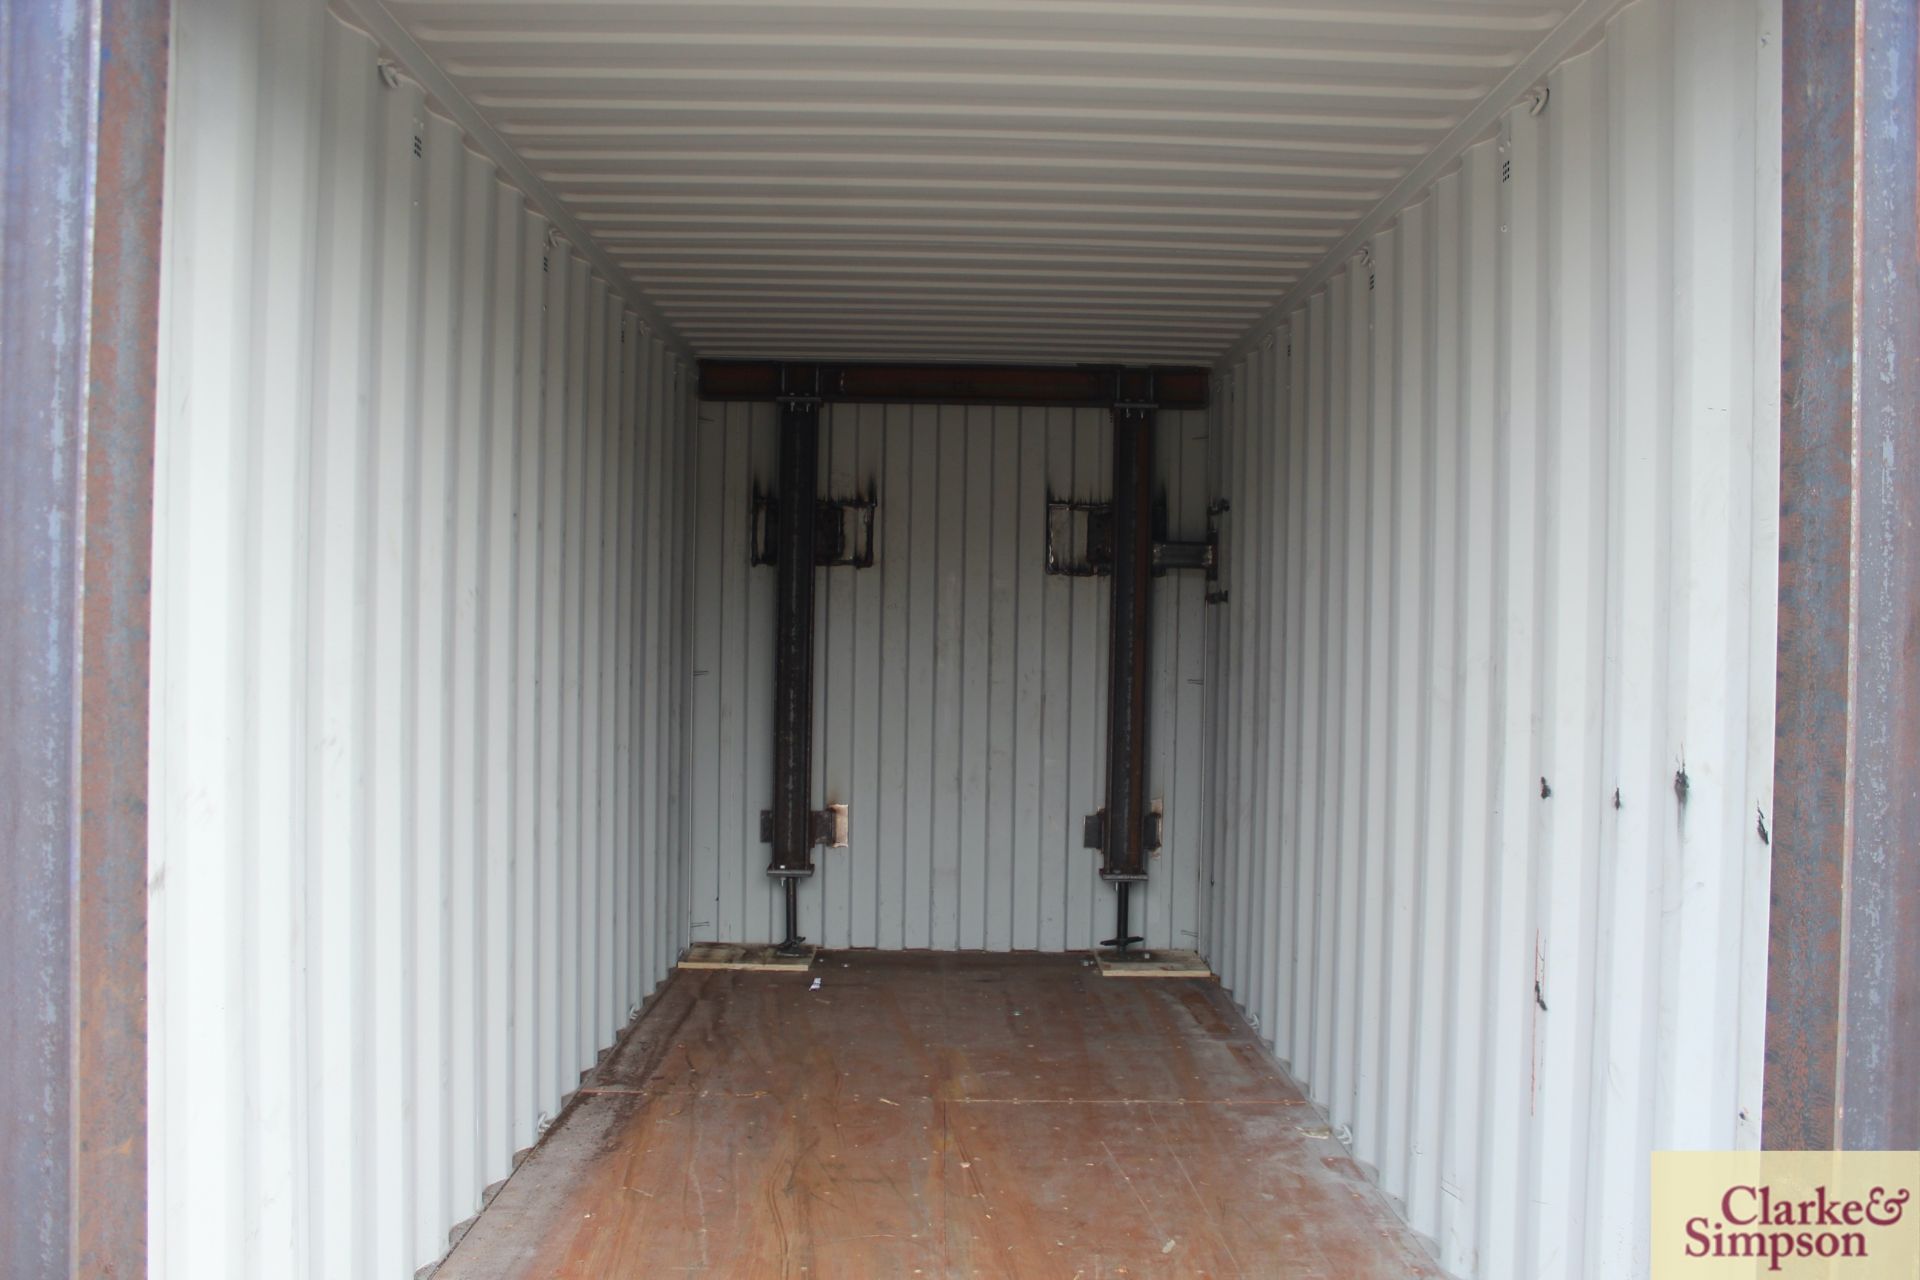 20ft x 9ft6in high shipping container. 2019. Partially reinforced to interior to include plates - Image 13 of 19